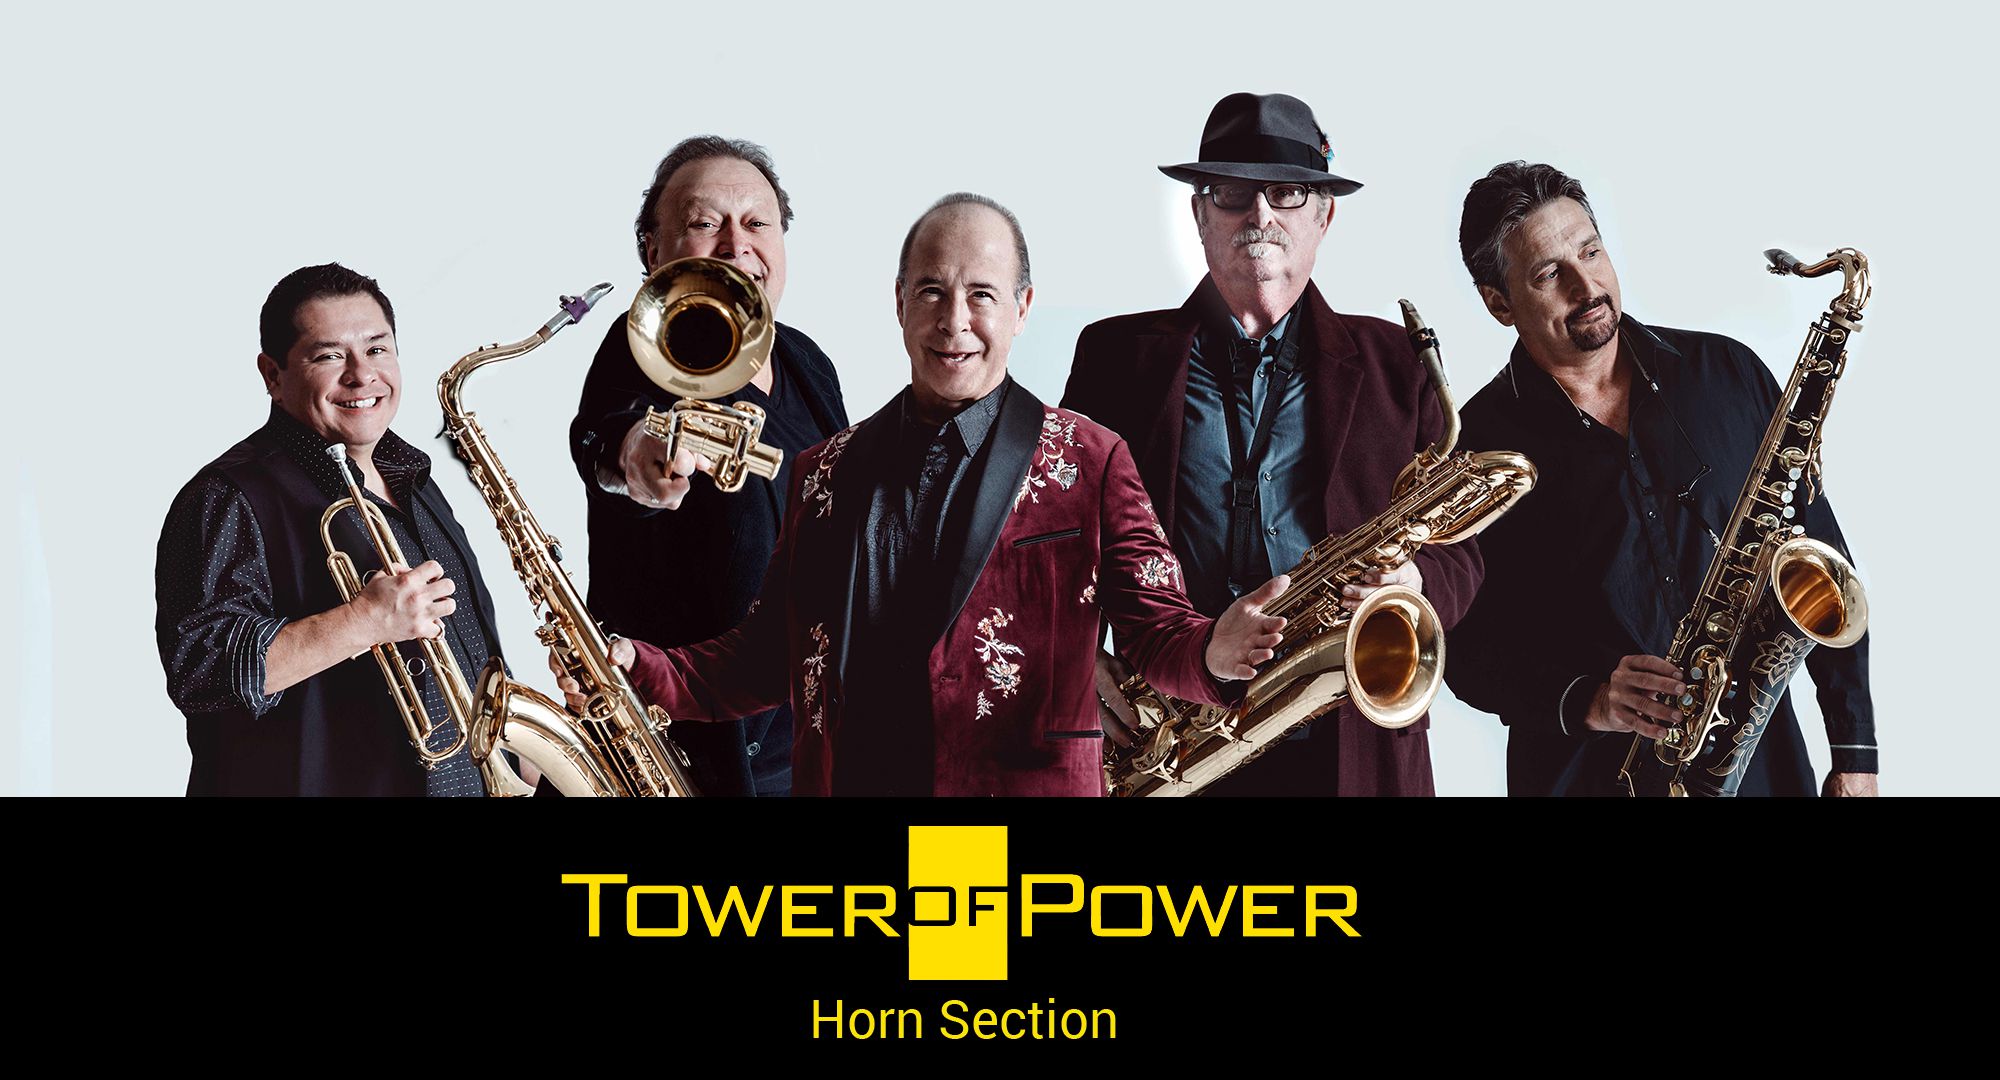 Tower of Power Horn Section